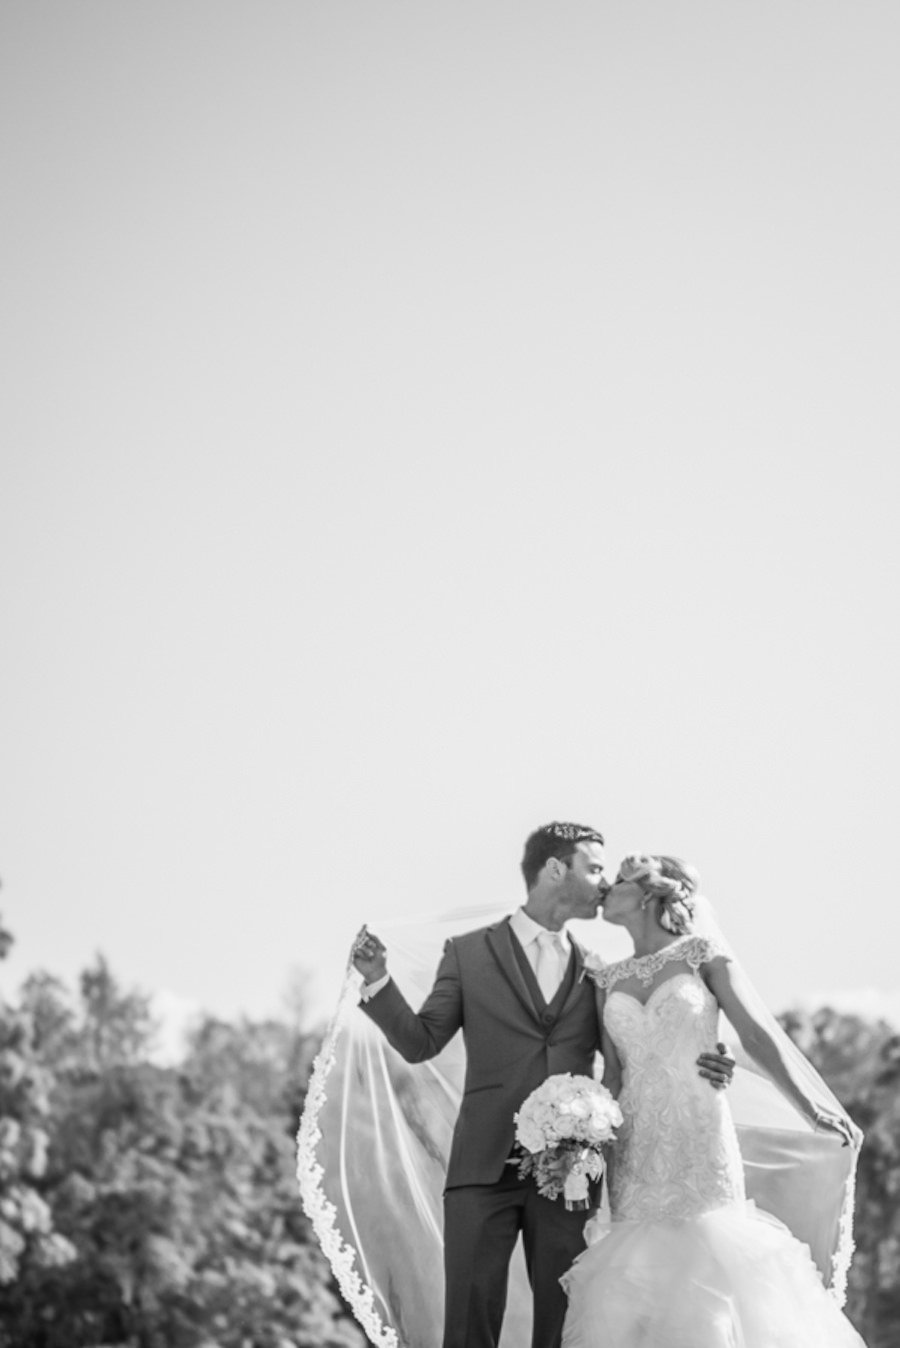 Black and White Outdoor Bride and Groom Wedding Portrait | Oldsmar Wedding Venue East Lake Woodlands Country Club